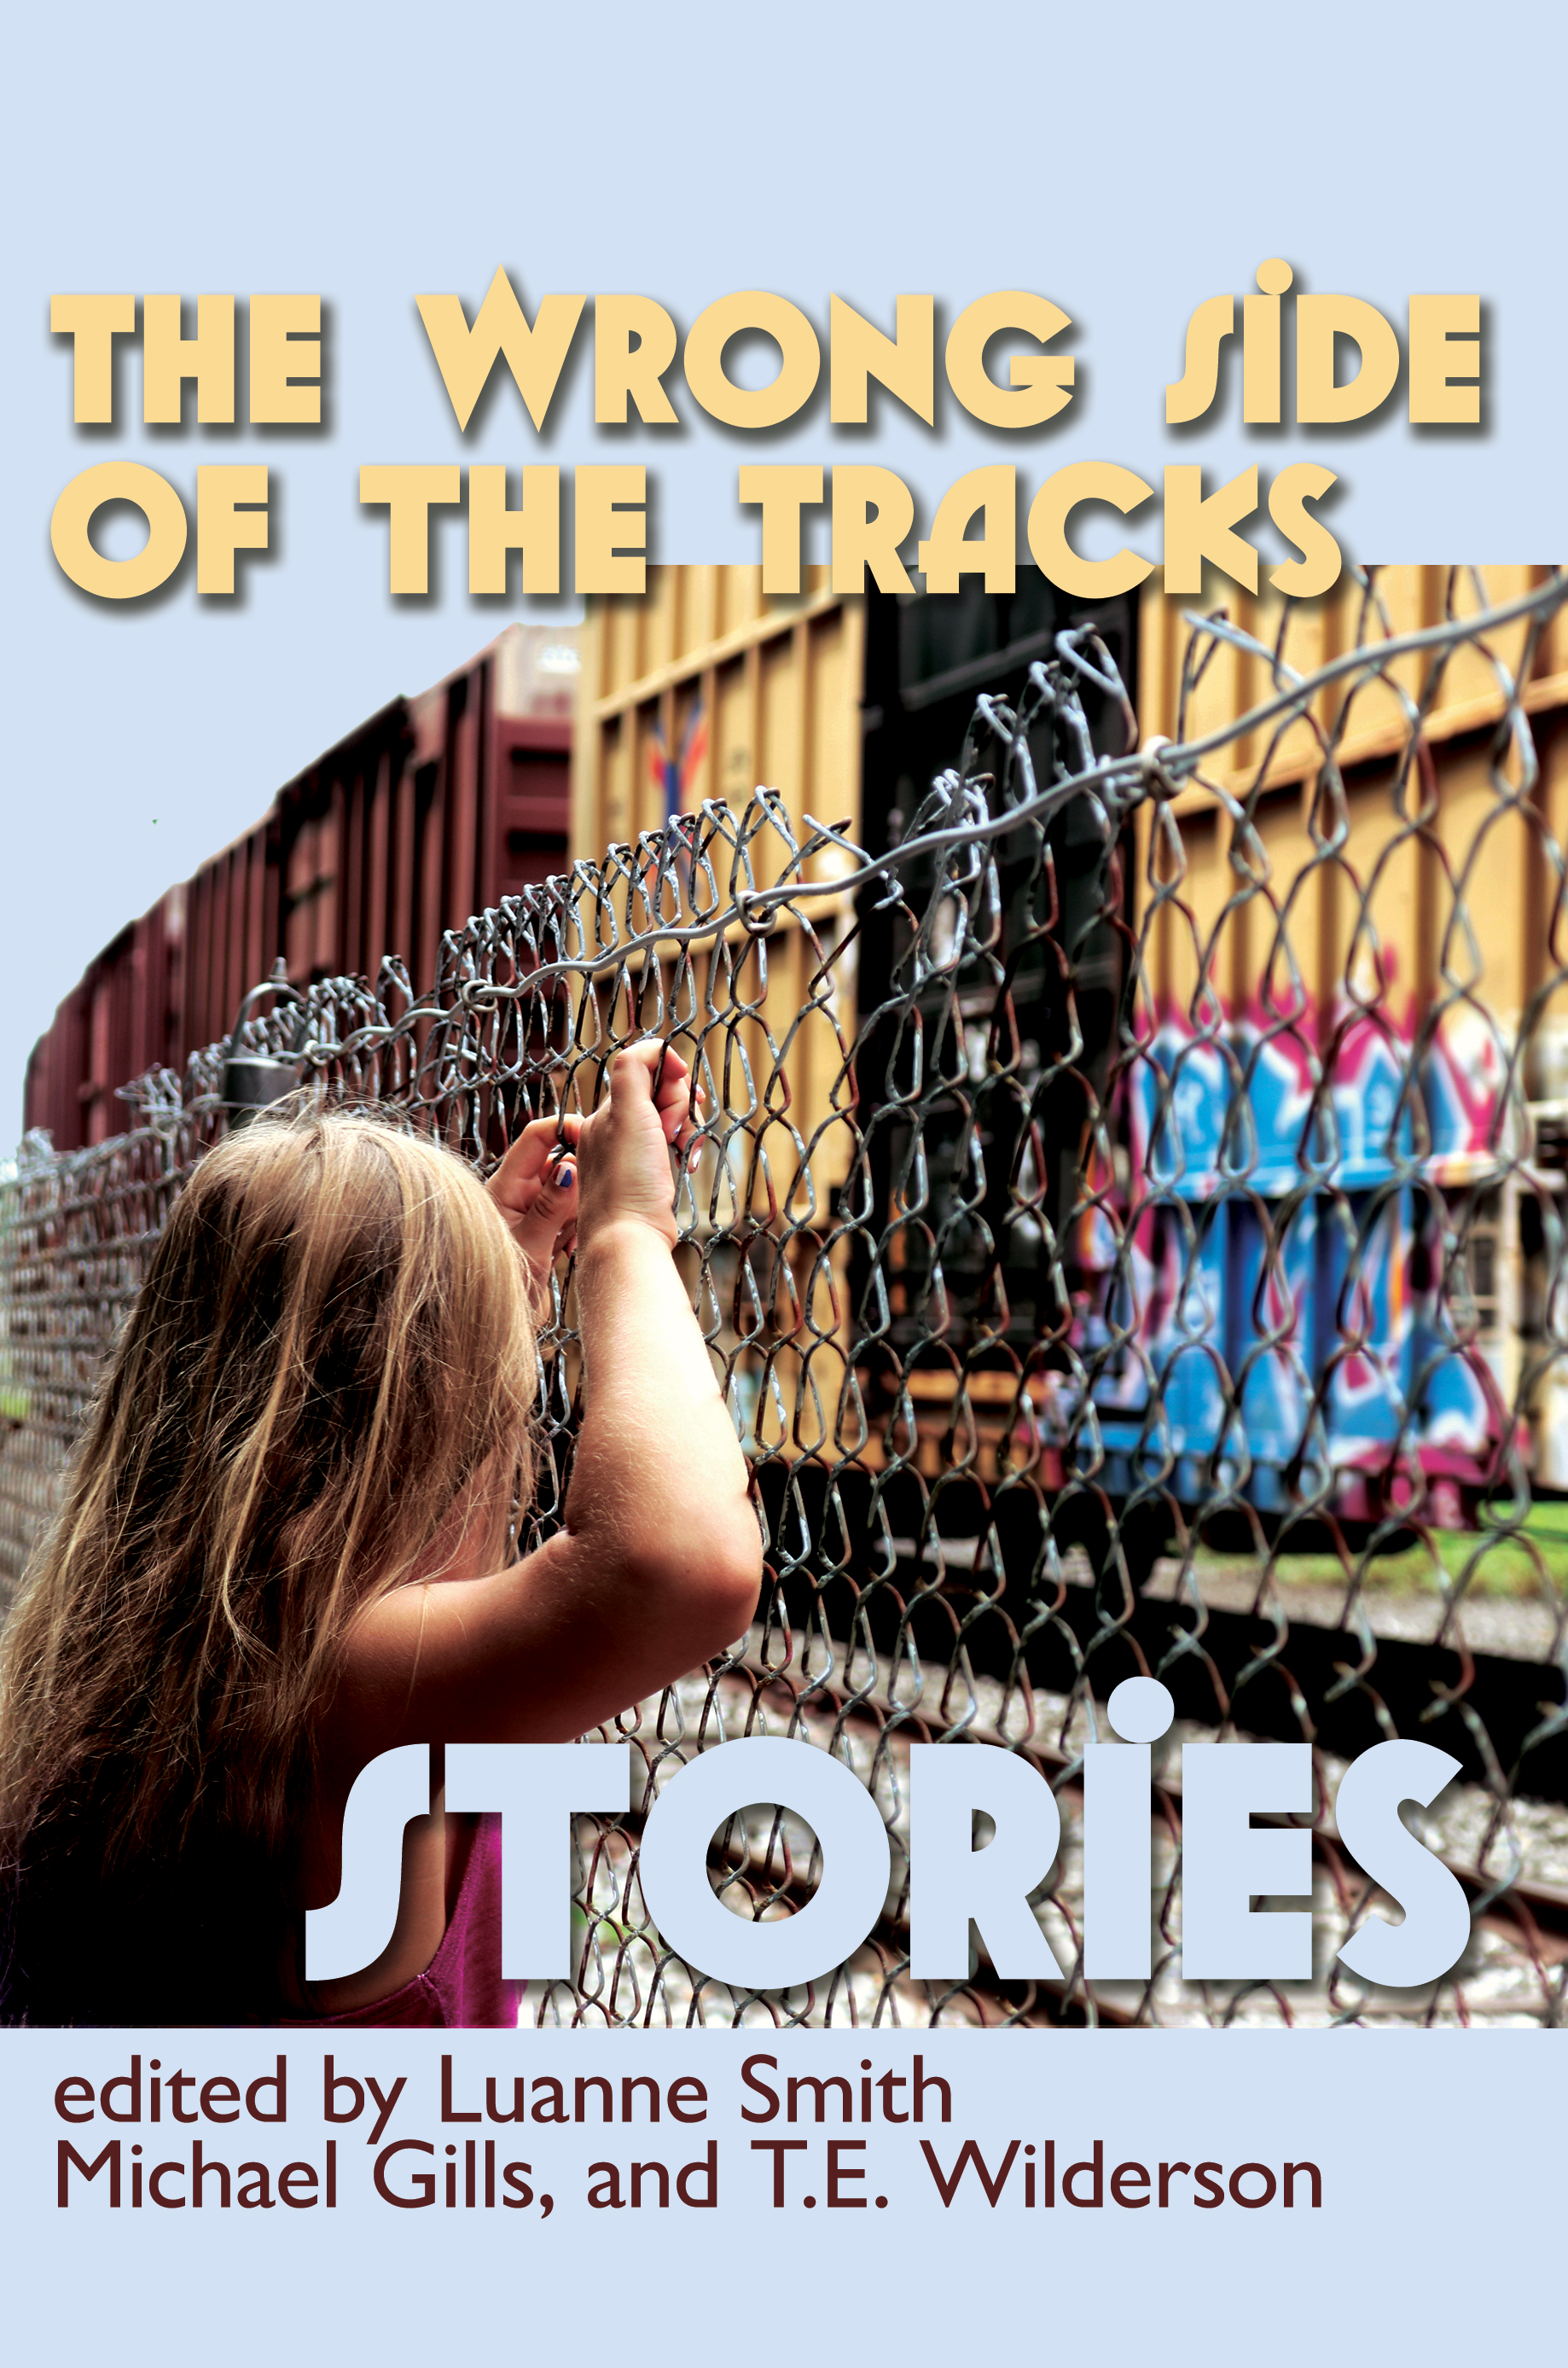 Cover from The Wrong Side of the Tracks: Stories, formerly known as Sticks and Bricks. Cover shows a girl peering through a chain link fence at boxcars sitting on a siding with graffiti painted on their sides.